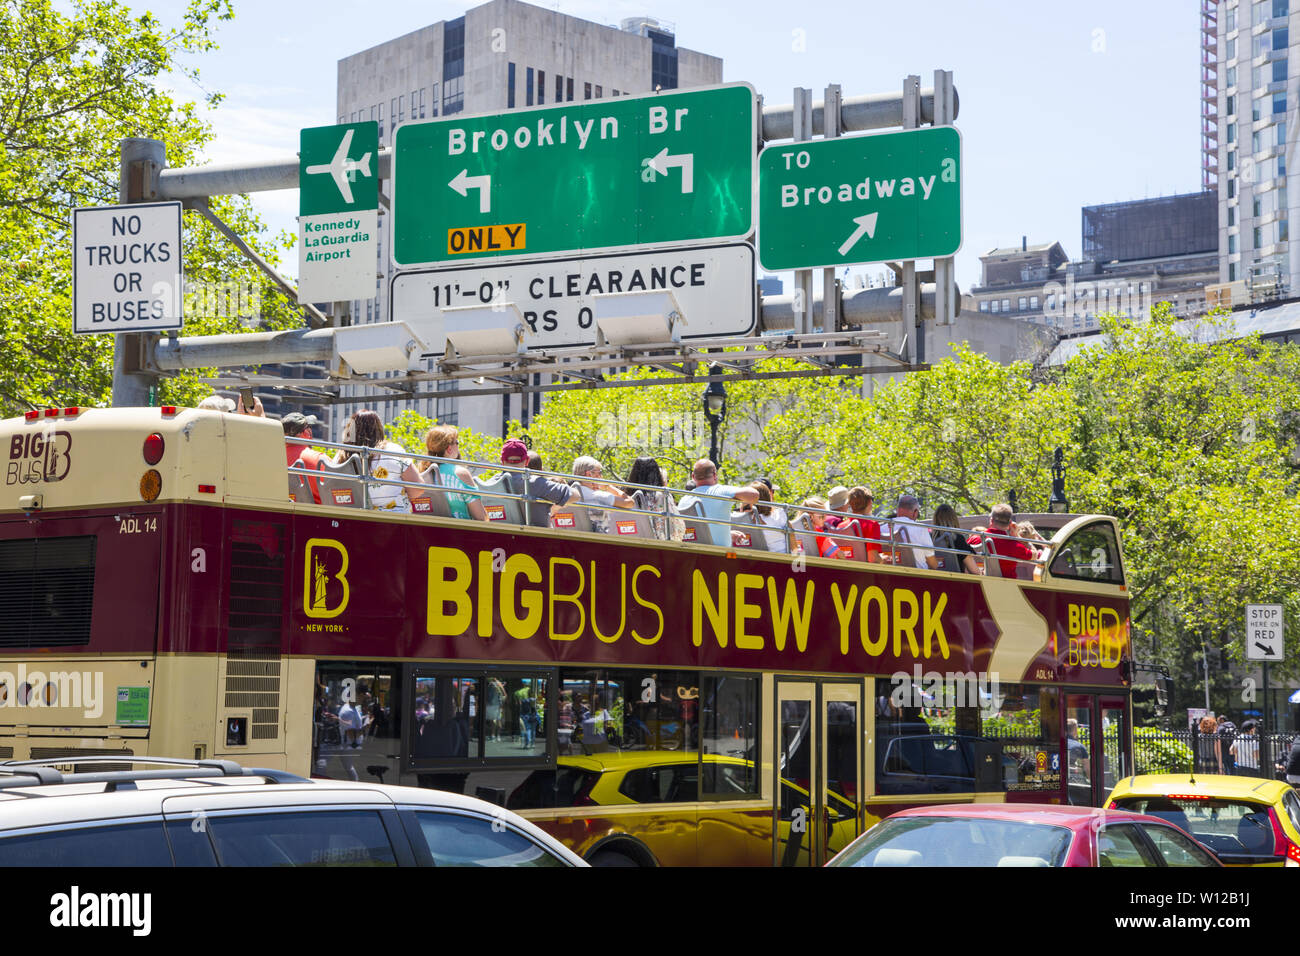 Tour bus at the entrance to the Brooklyn Bridge. Traveling by bus or on foot, crossing the Brooklyn Bridge is a popular tourist attraction in New York City. Stock Photo